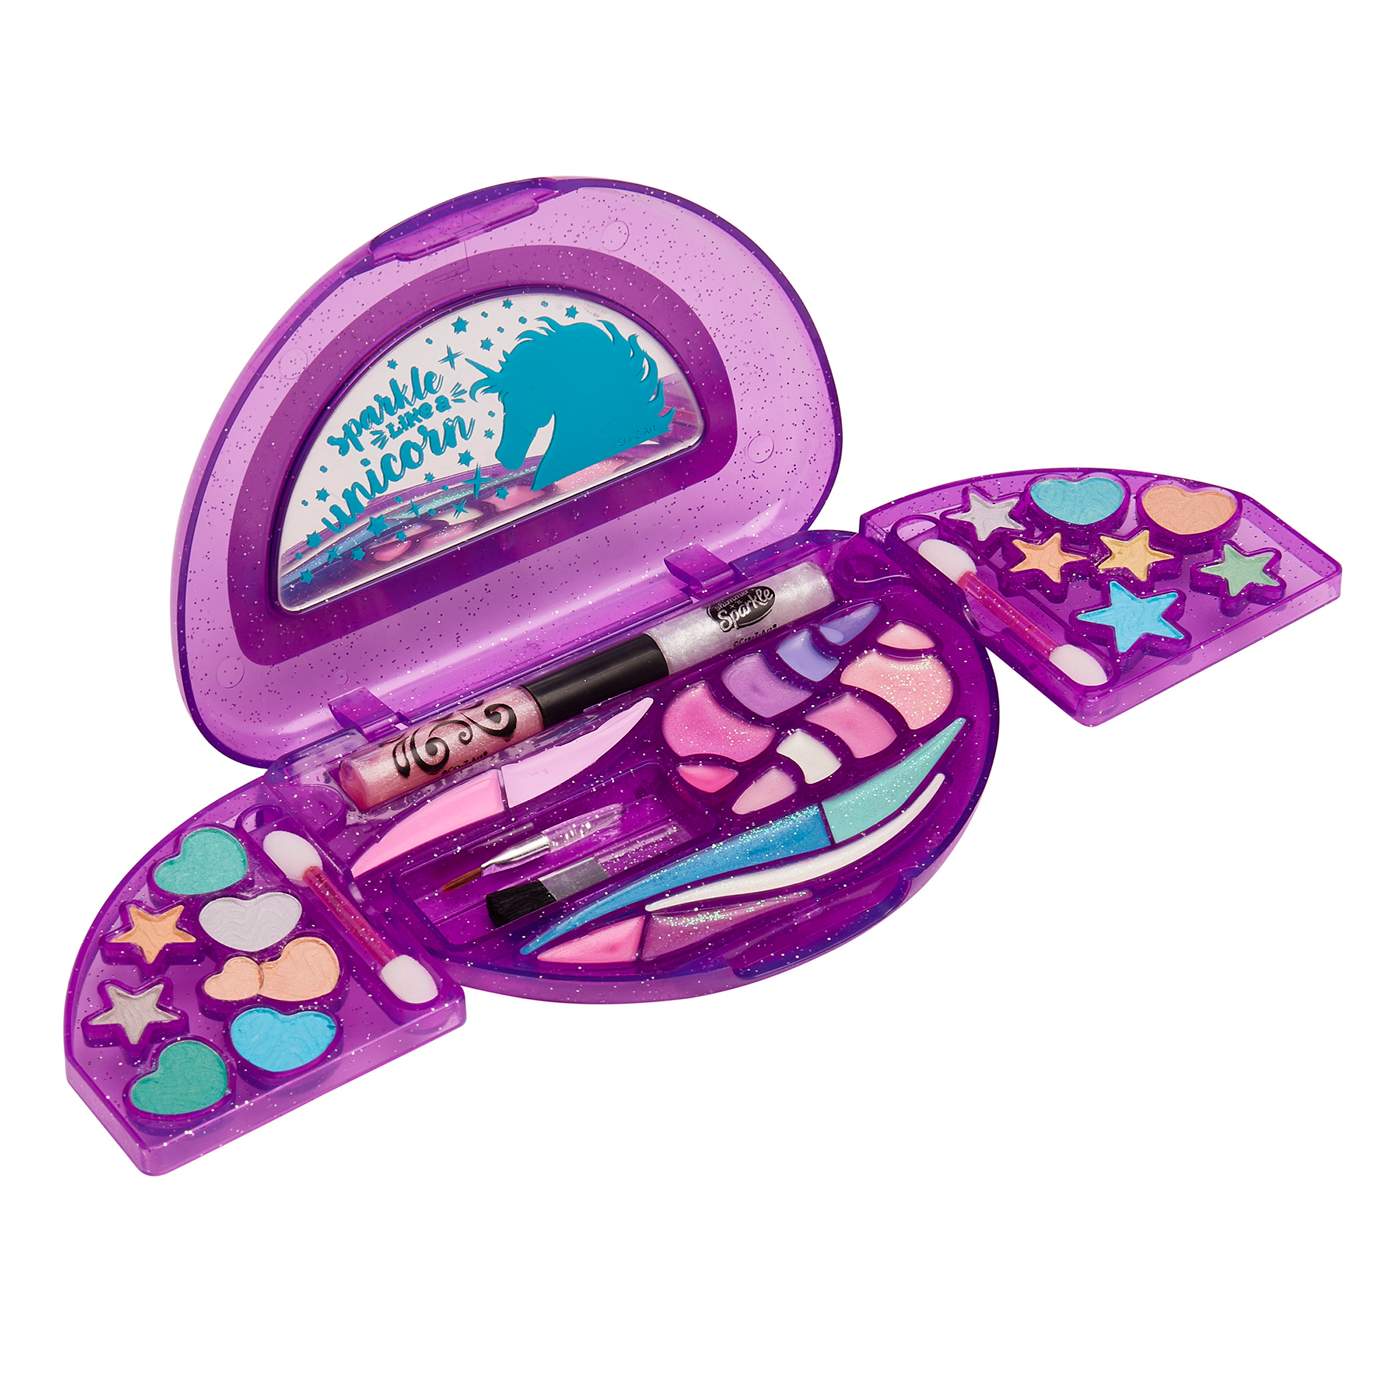 Cra-Z-Art Shimmer 'N Sparkle All-In-One Beauty Compact; image 2 of 4